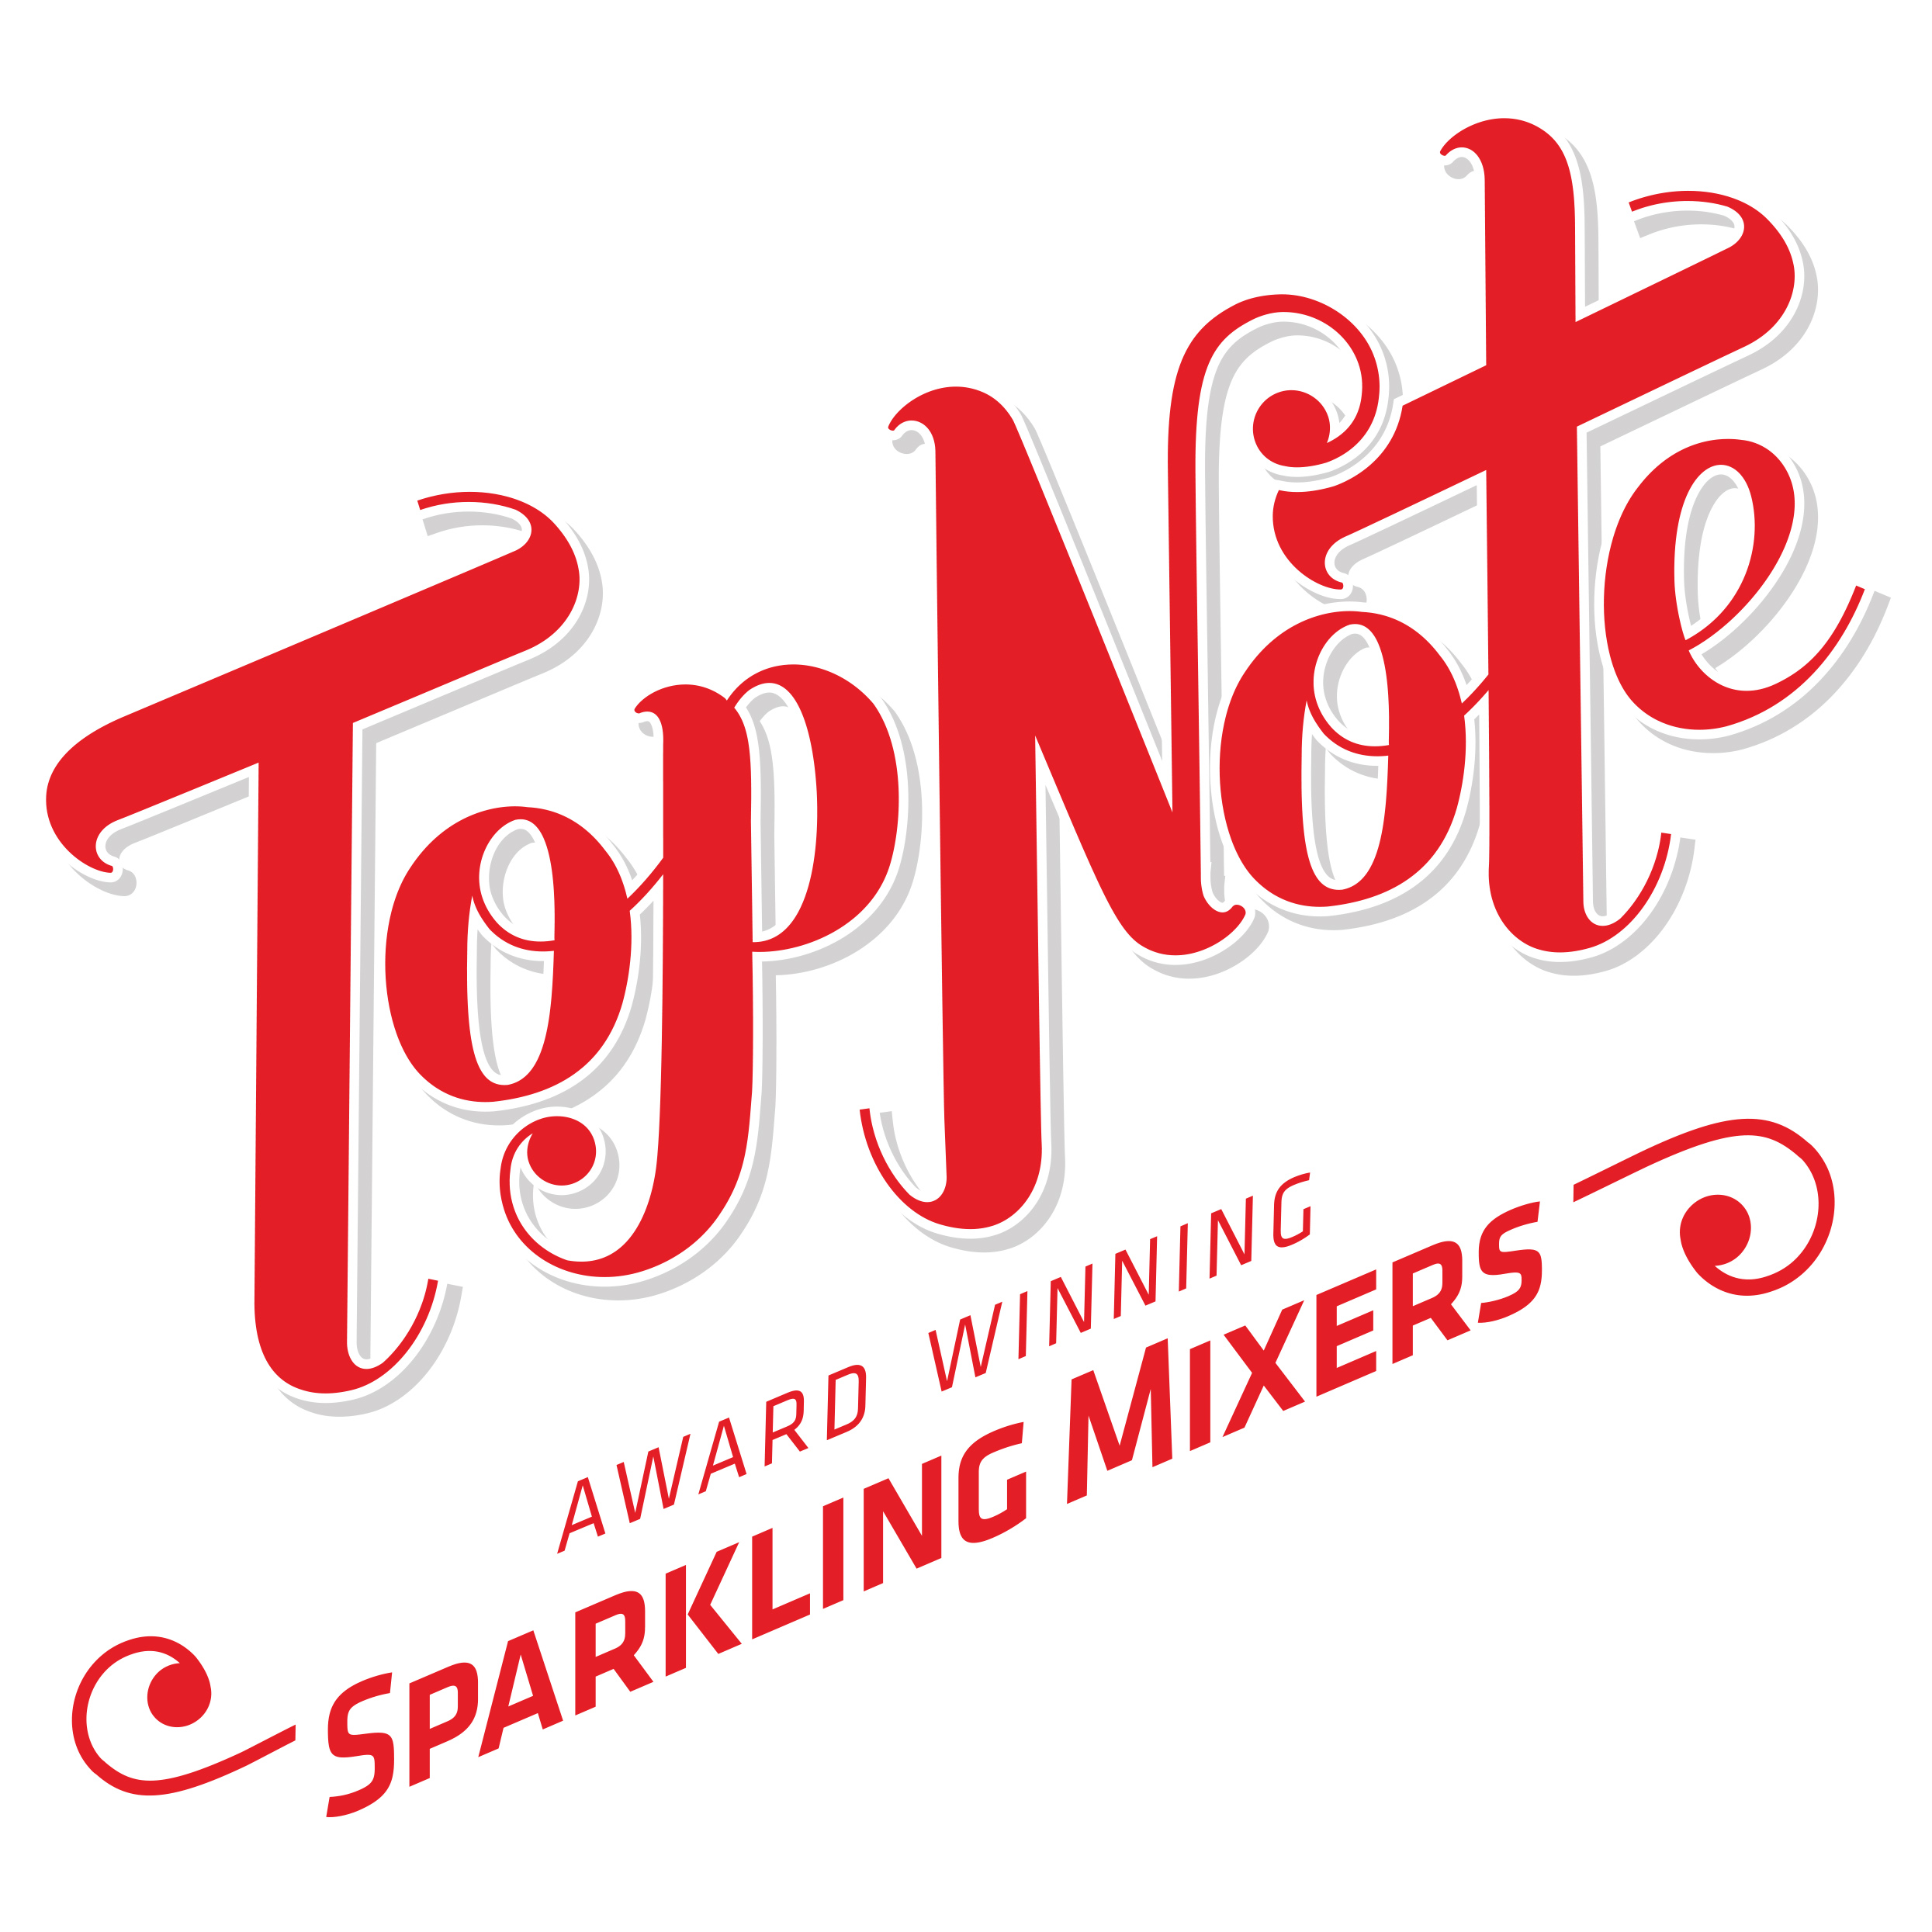 Top Note Sparkling Mixers